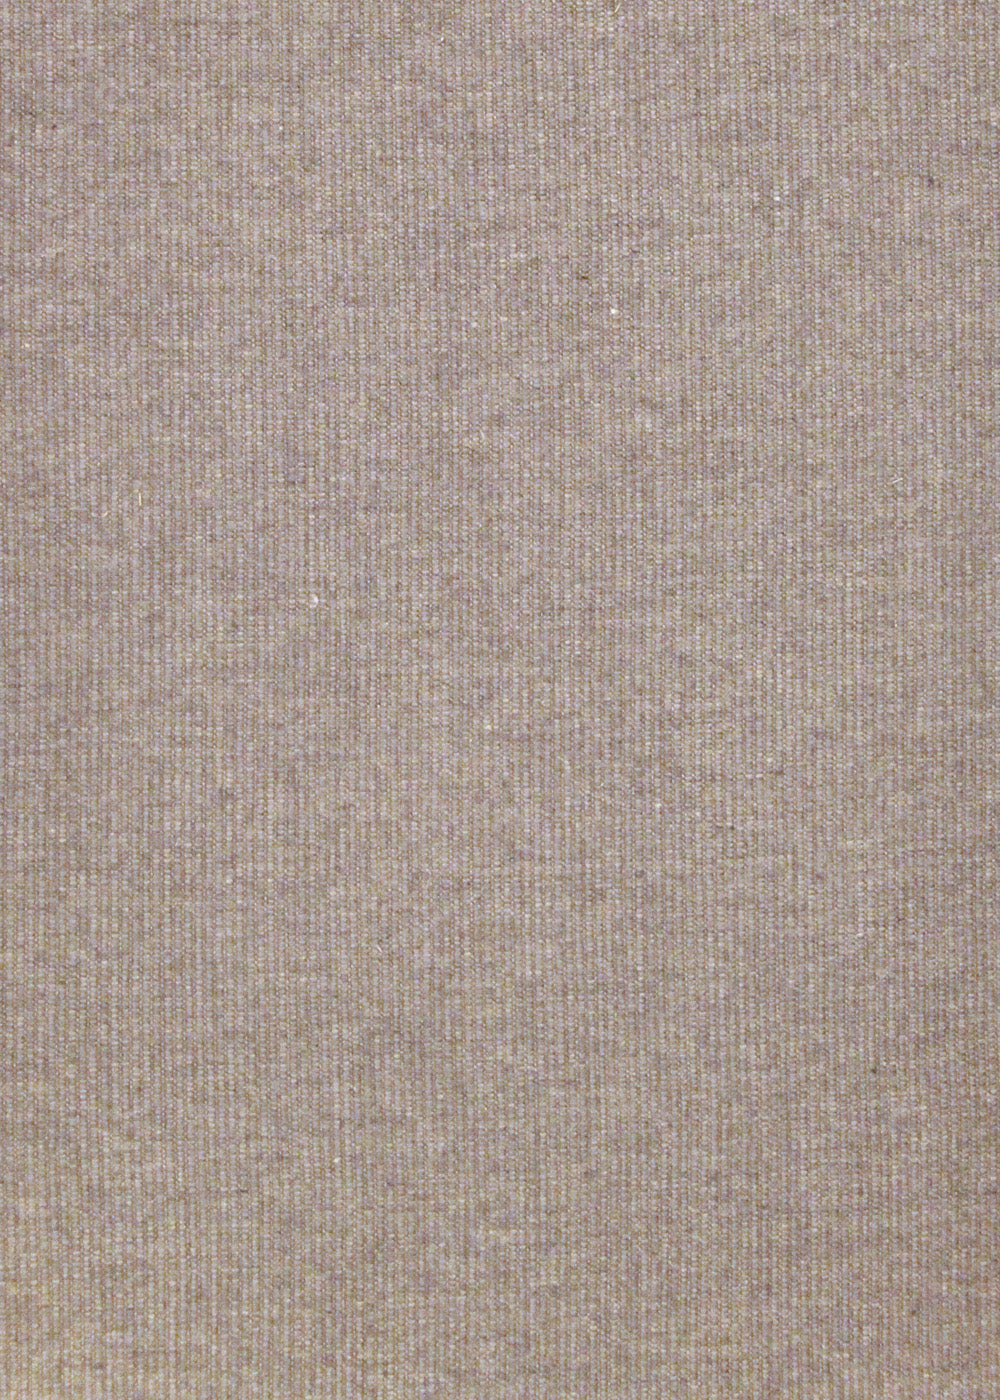 cashmere upholstery fabric in soft brown